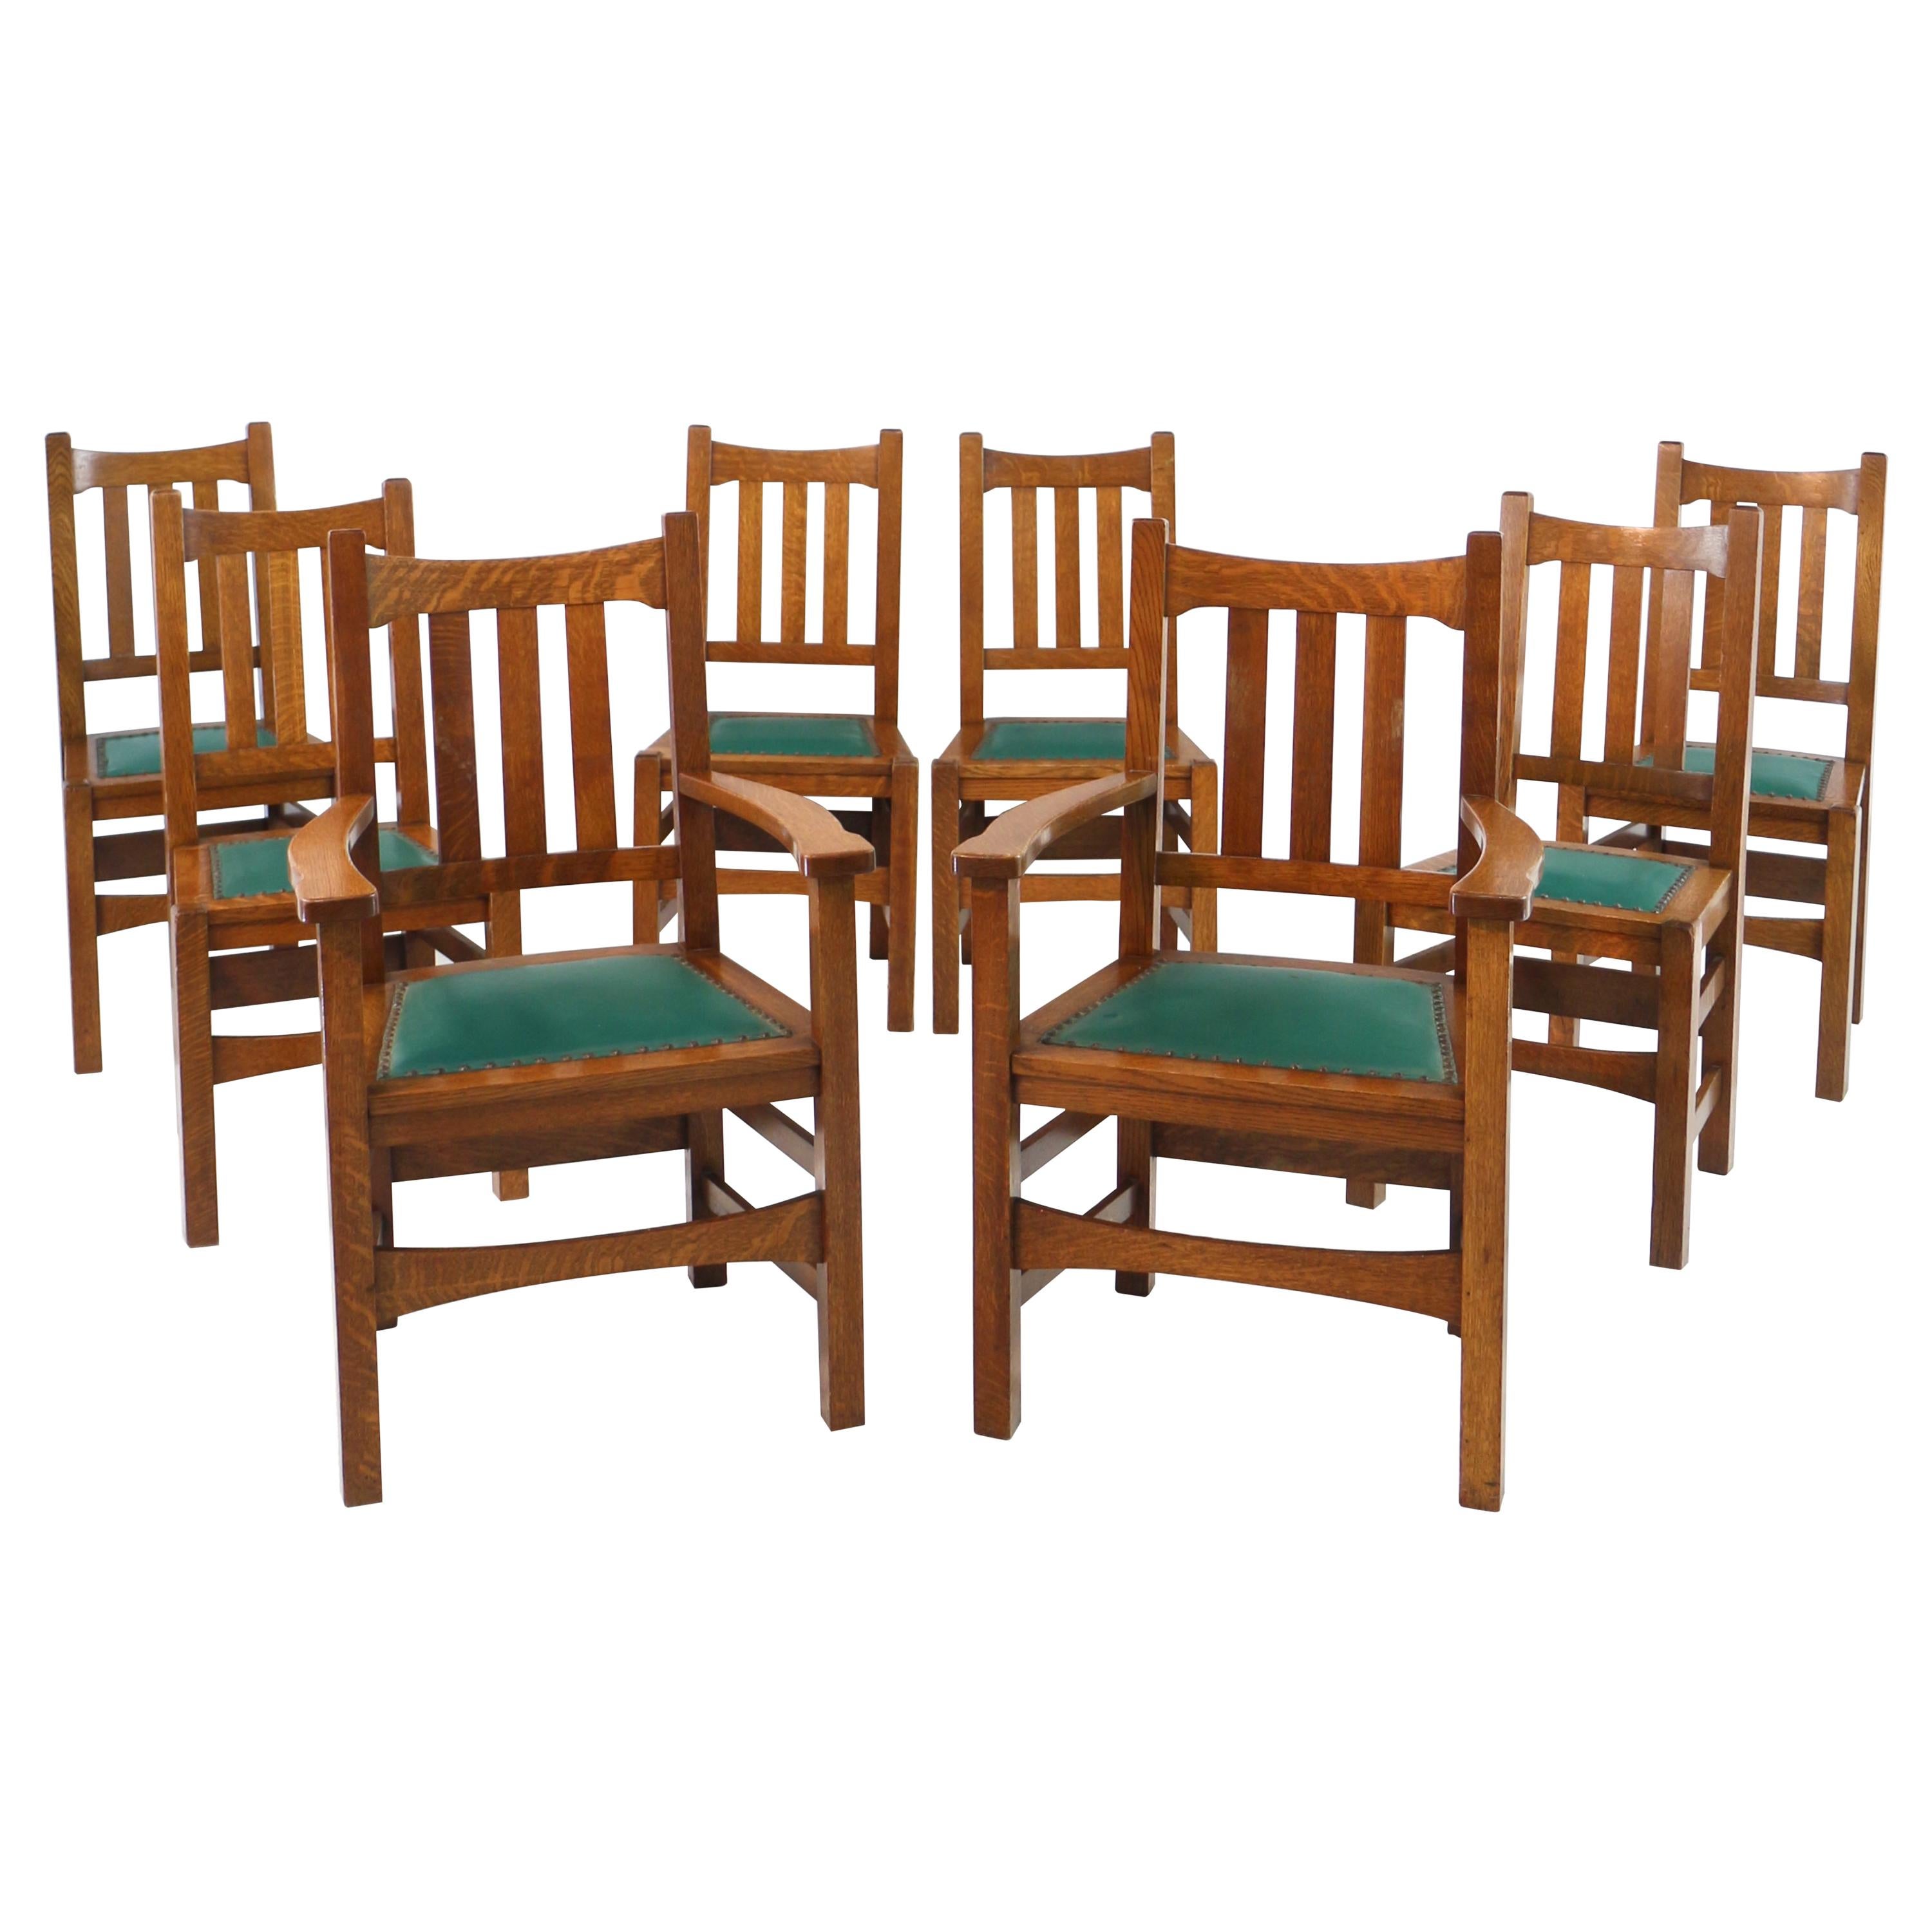 Set of 8 American Stickley Arts & Crafts Mission Oak Dining Chairs, circa 1900